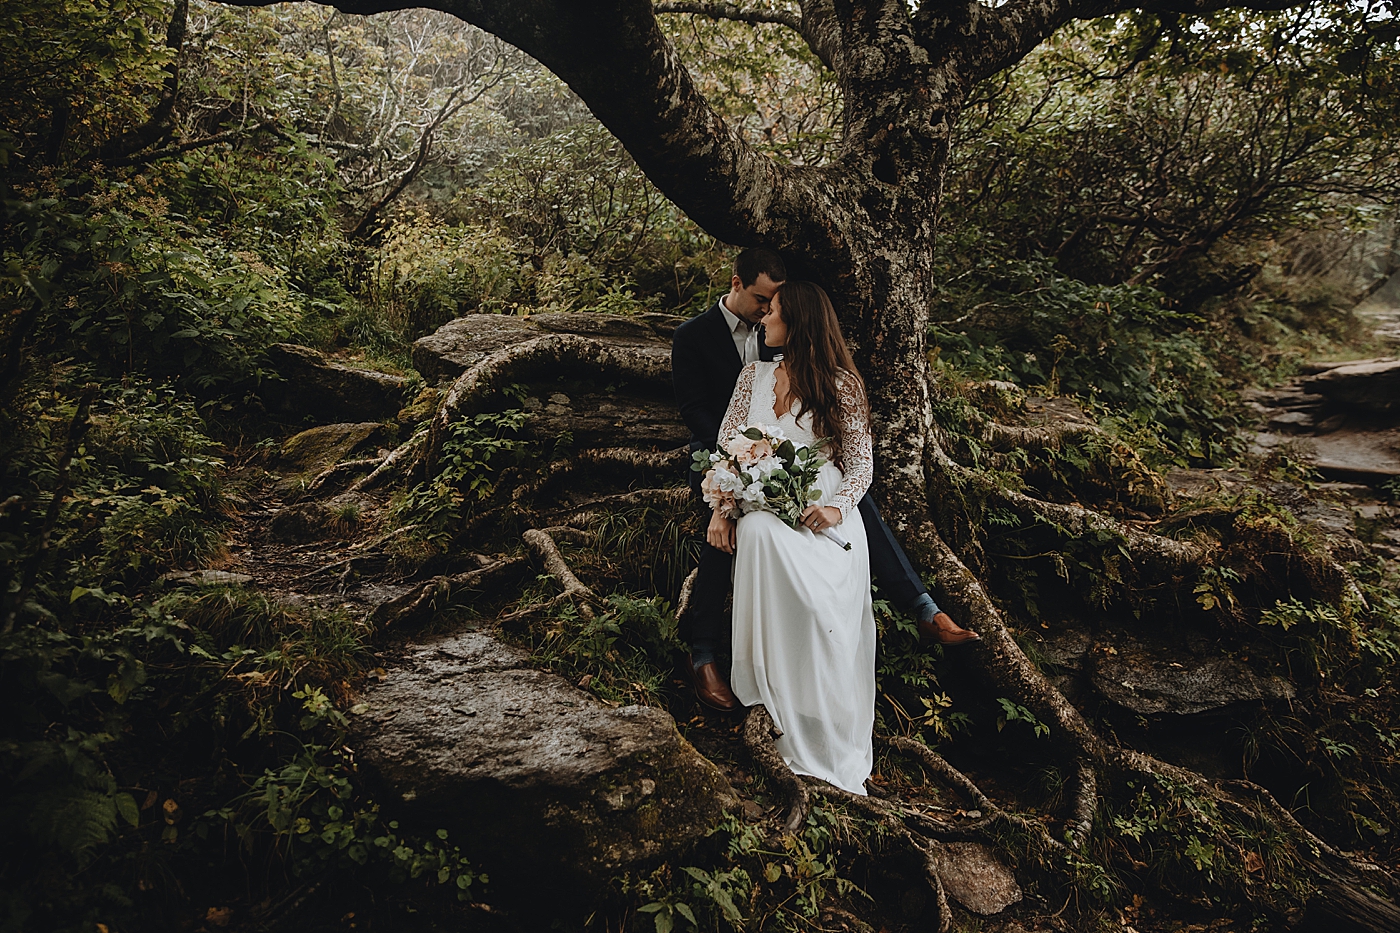 Bride and Groom nuzzling by tree in forest Catawba Falls Asheville, NC Elopement Photography captured by Maggie Alvarez Photography